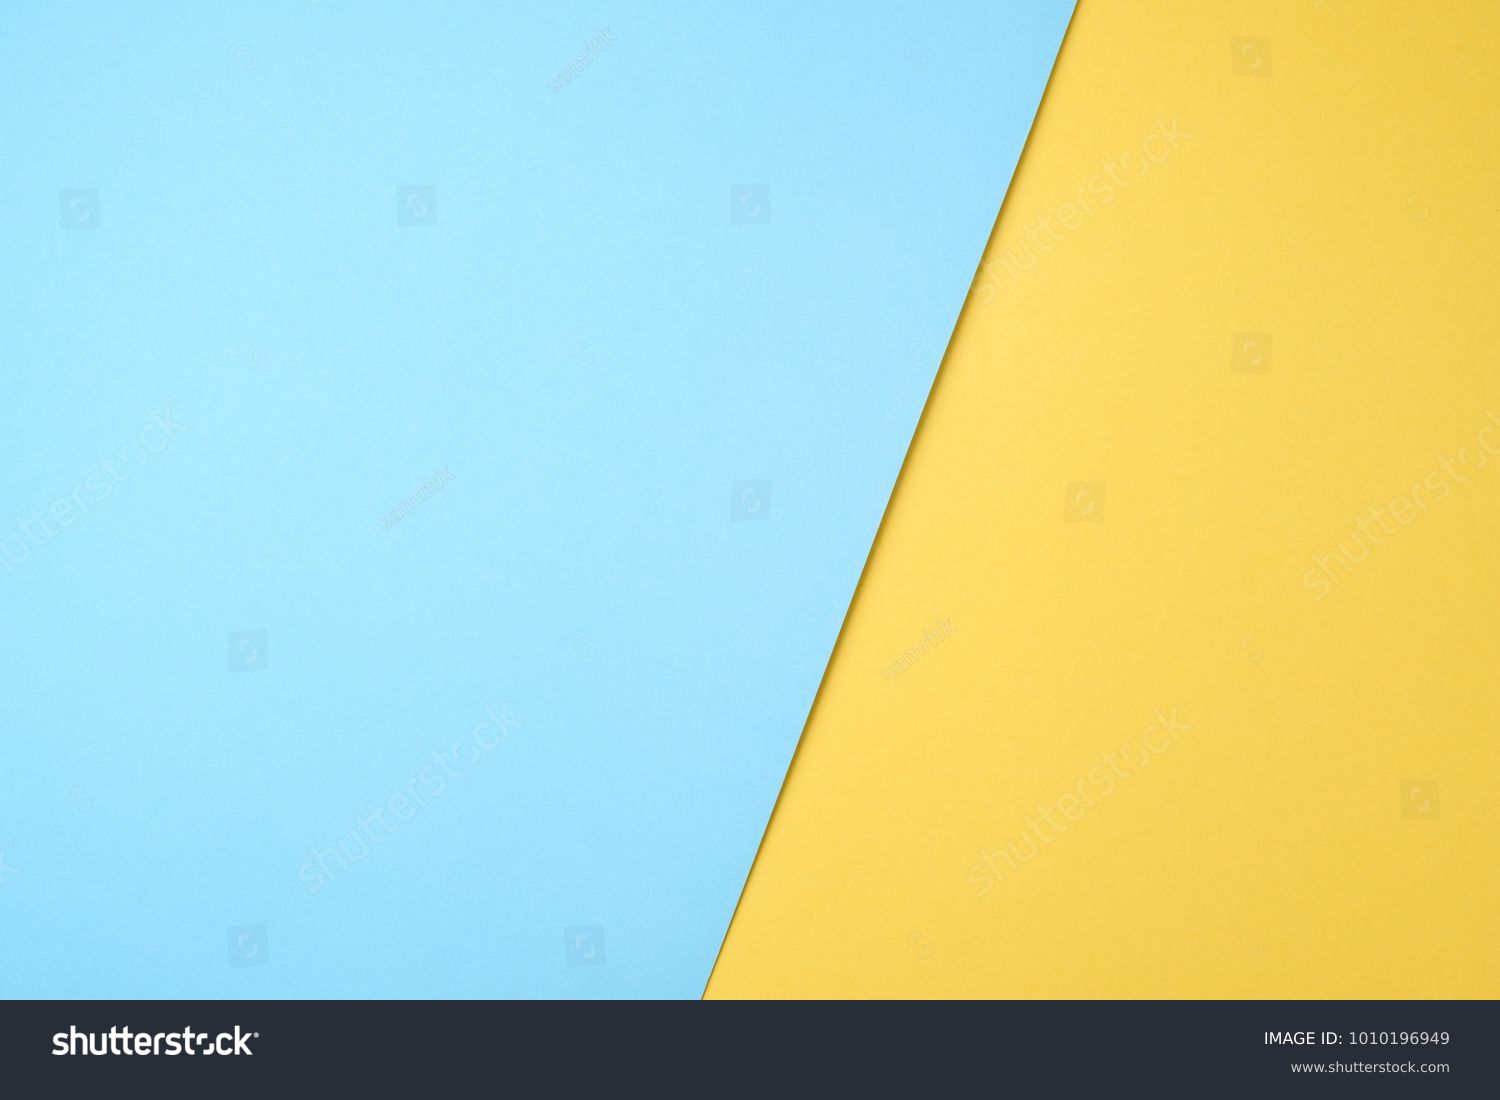 blue and yellow pastel paper color for background #1010196949